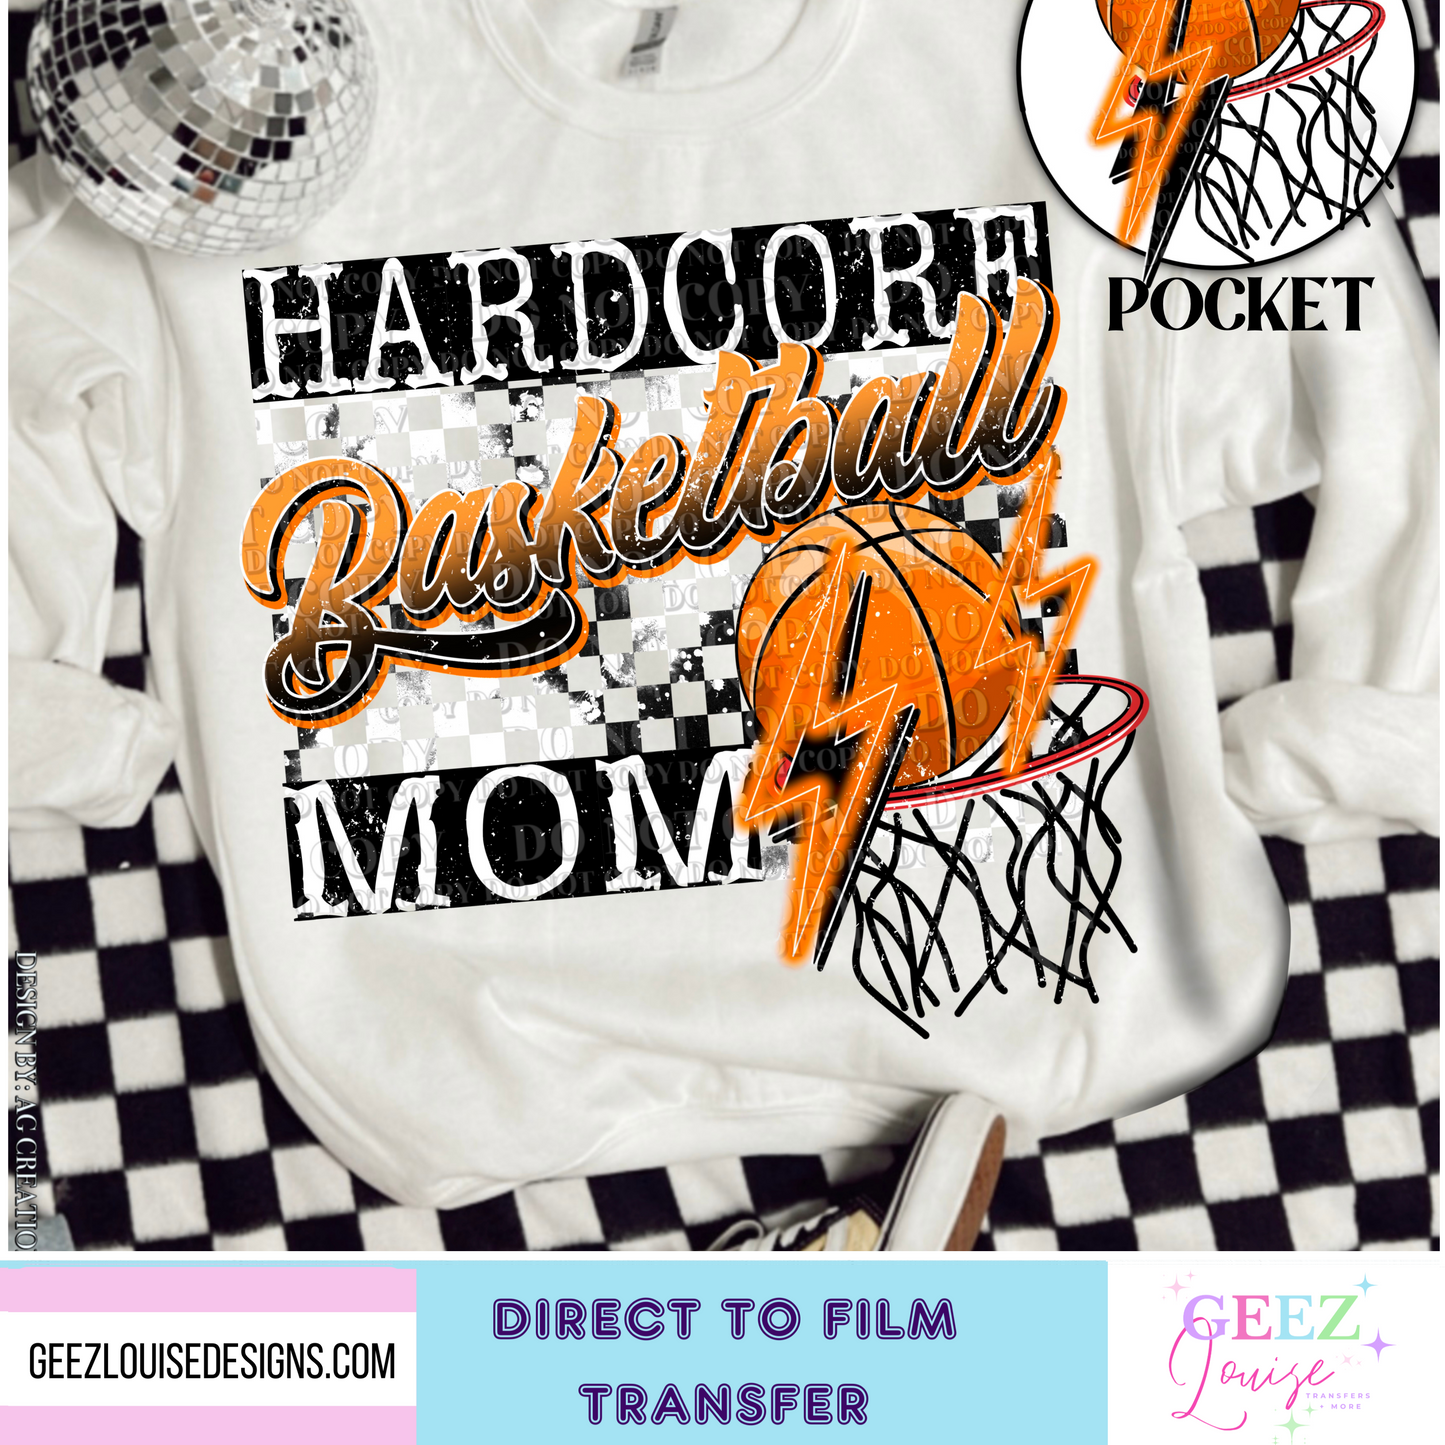 Hardcore Basketball mom - Direct to Film Transfer - made to order